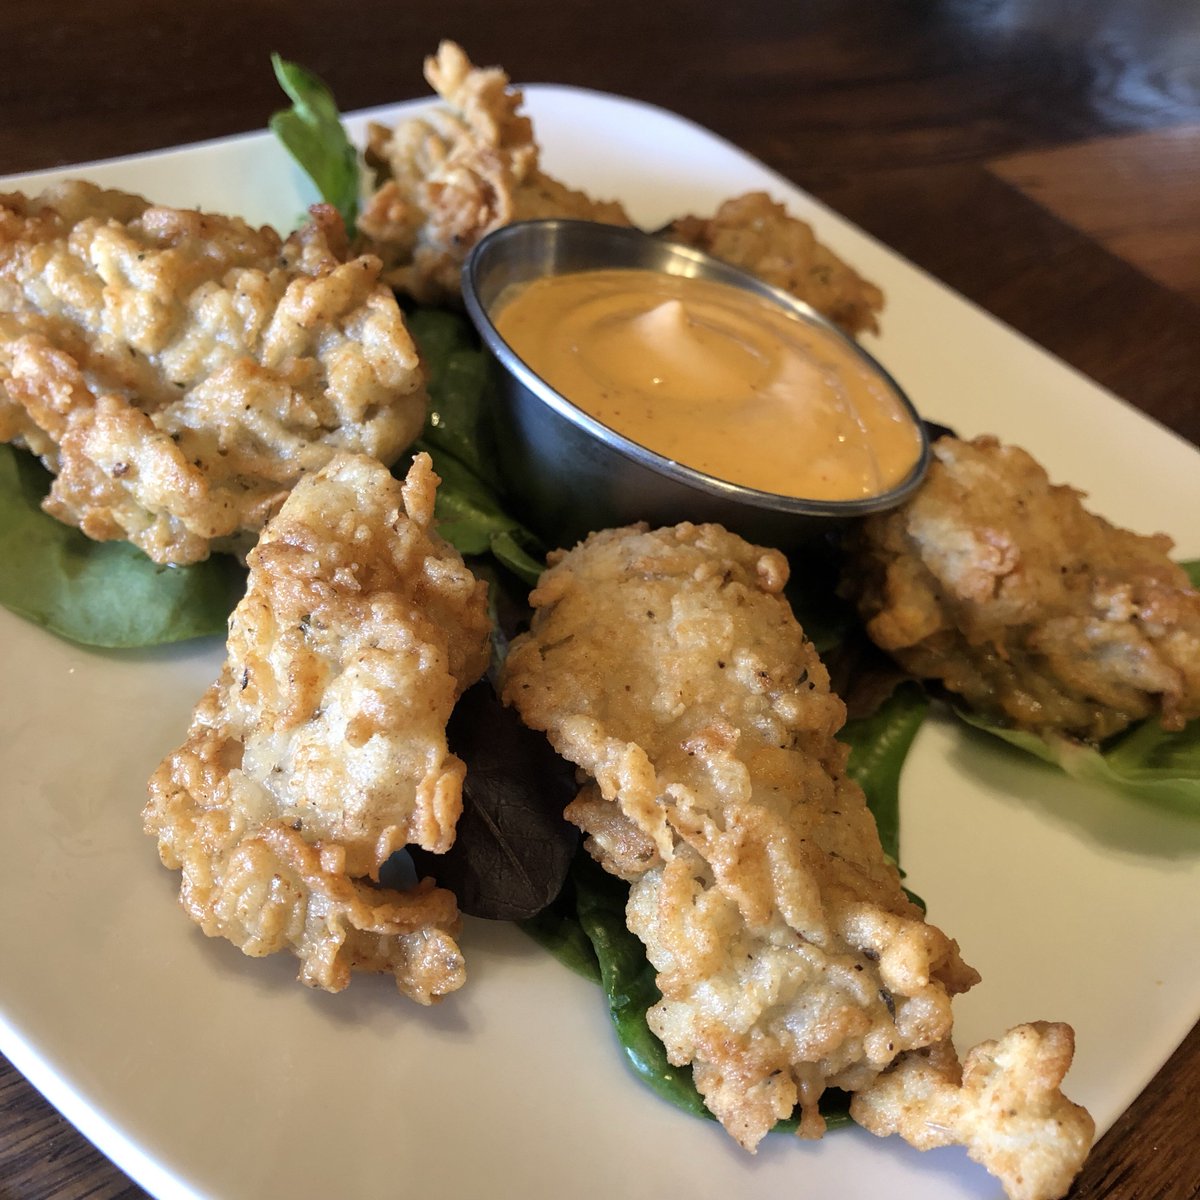 This weekend only in Milwaukee! Fried Oysters, get em while their hot!